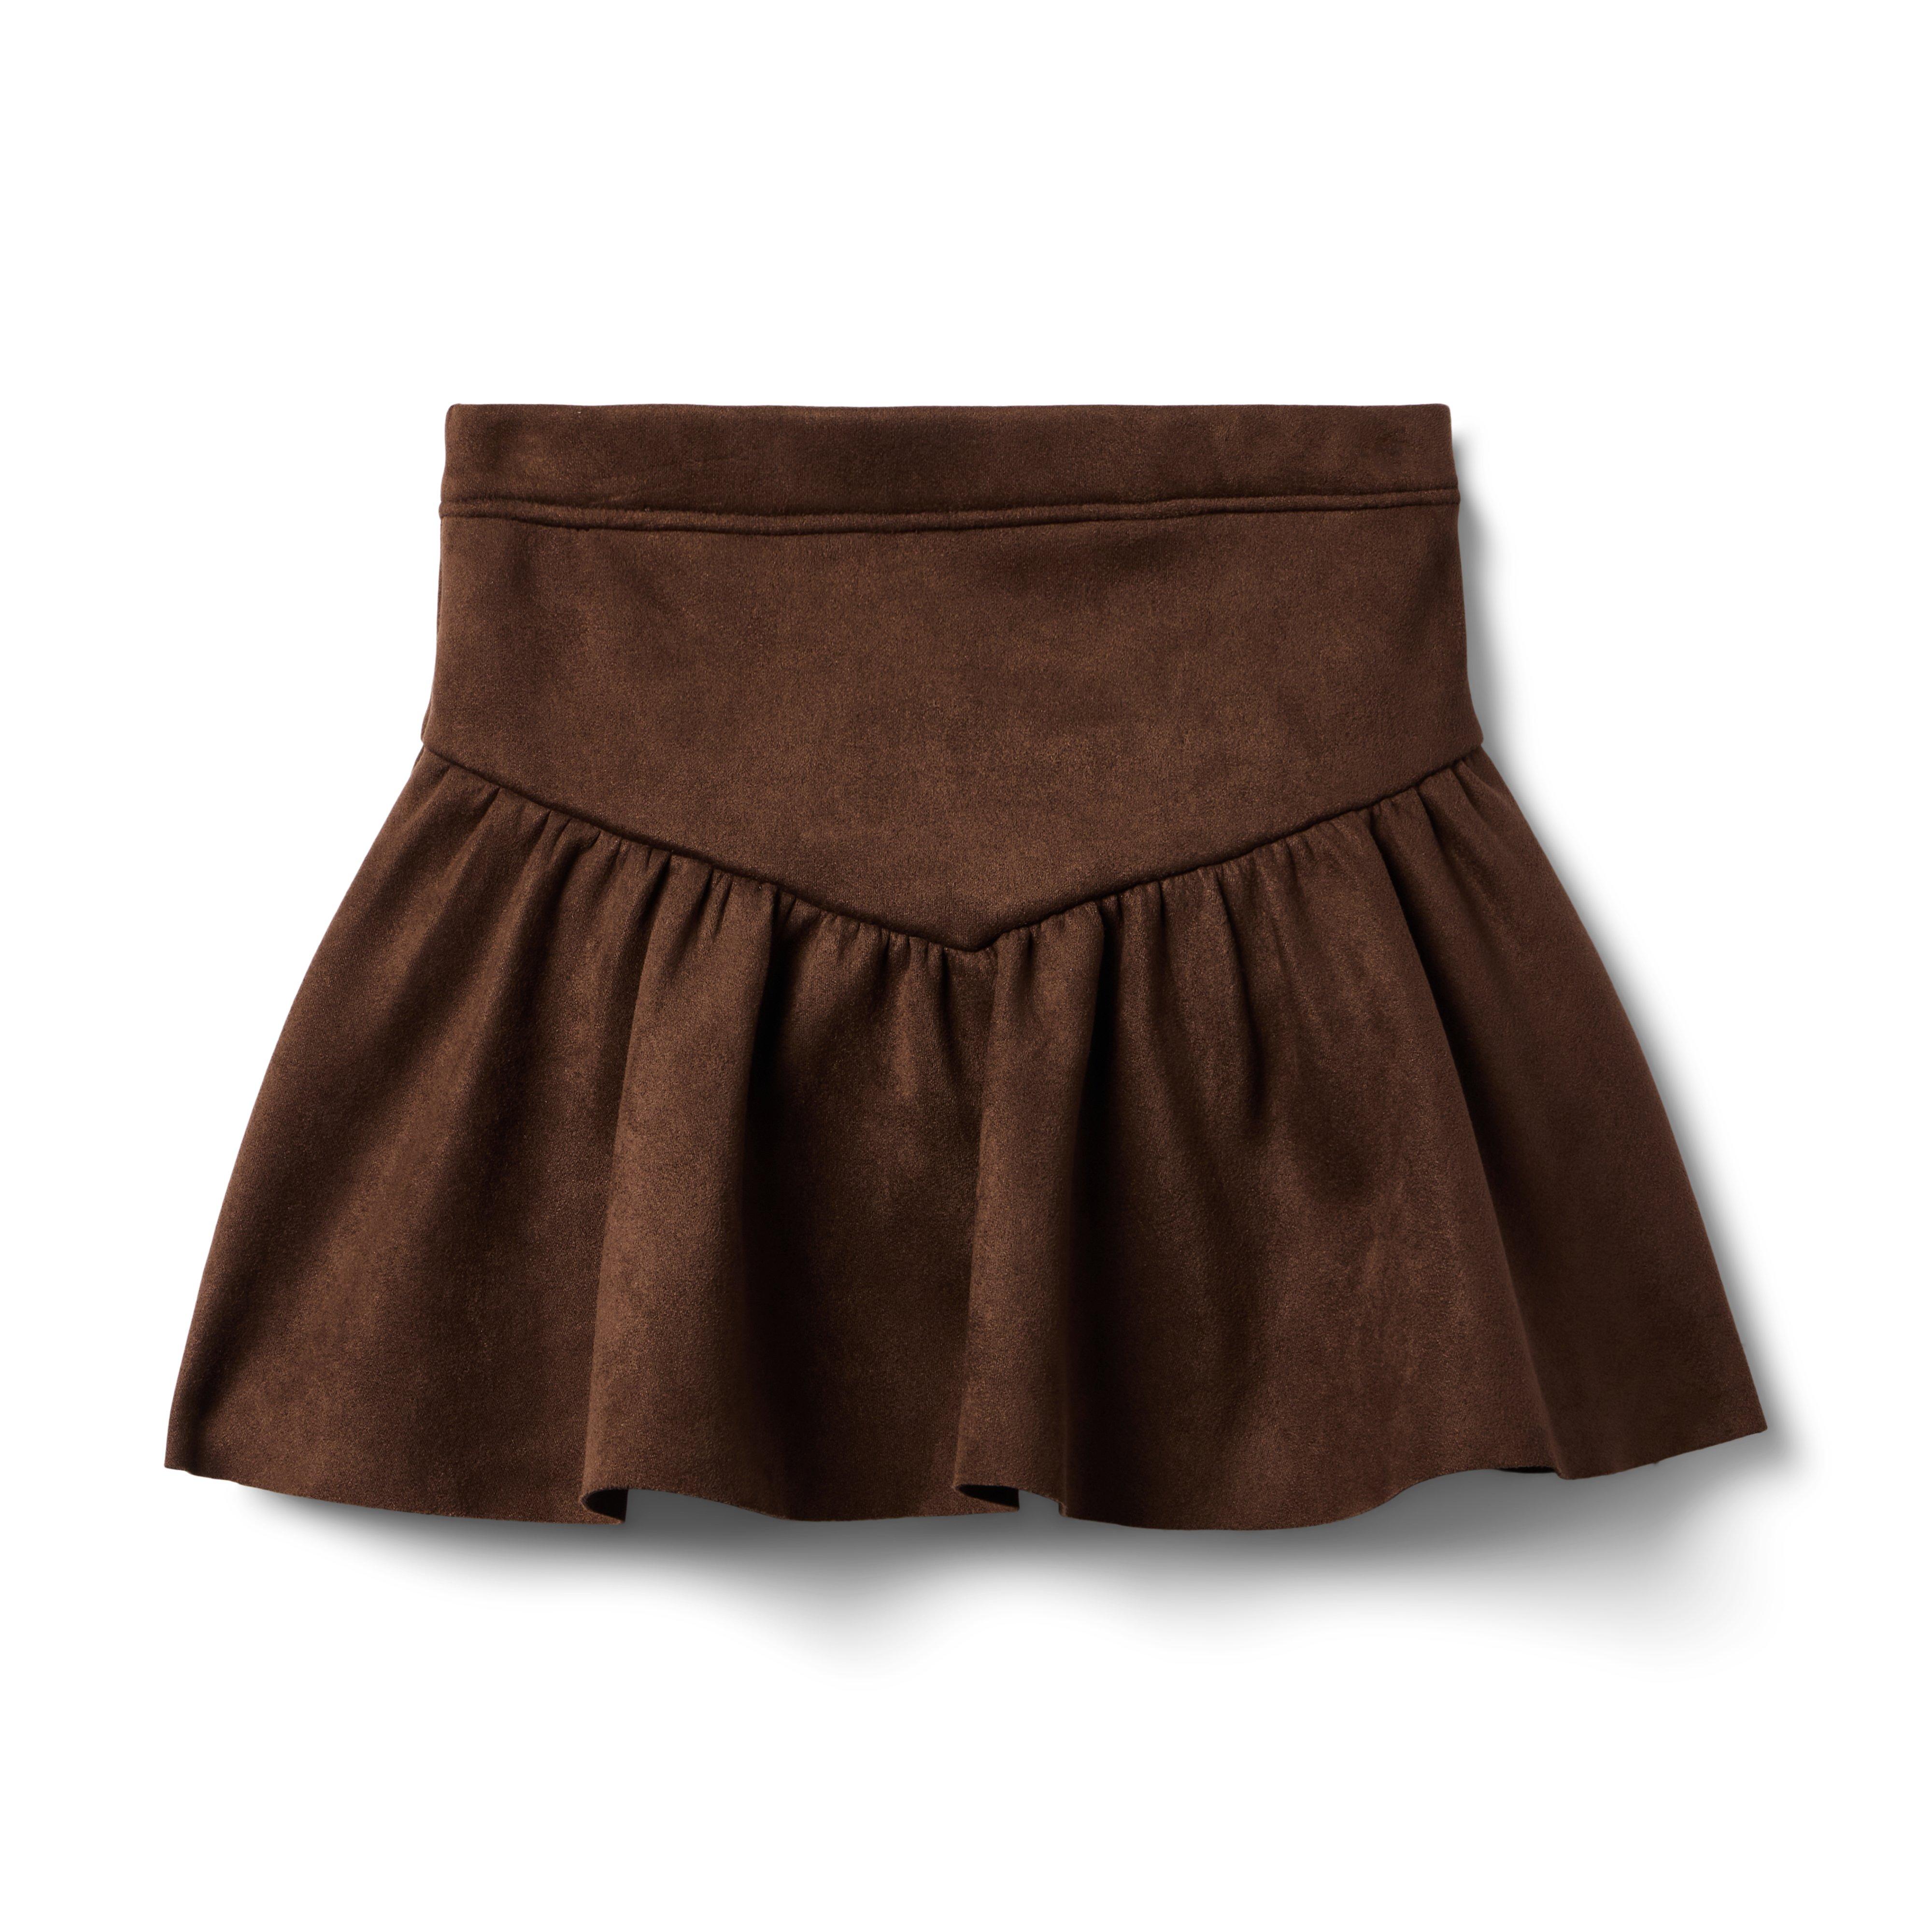 The Sueded Ruffle Skirt